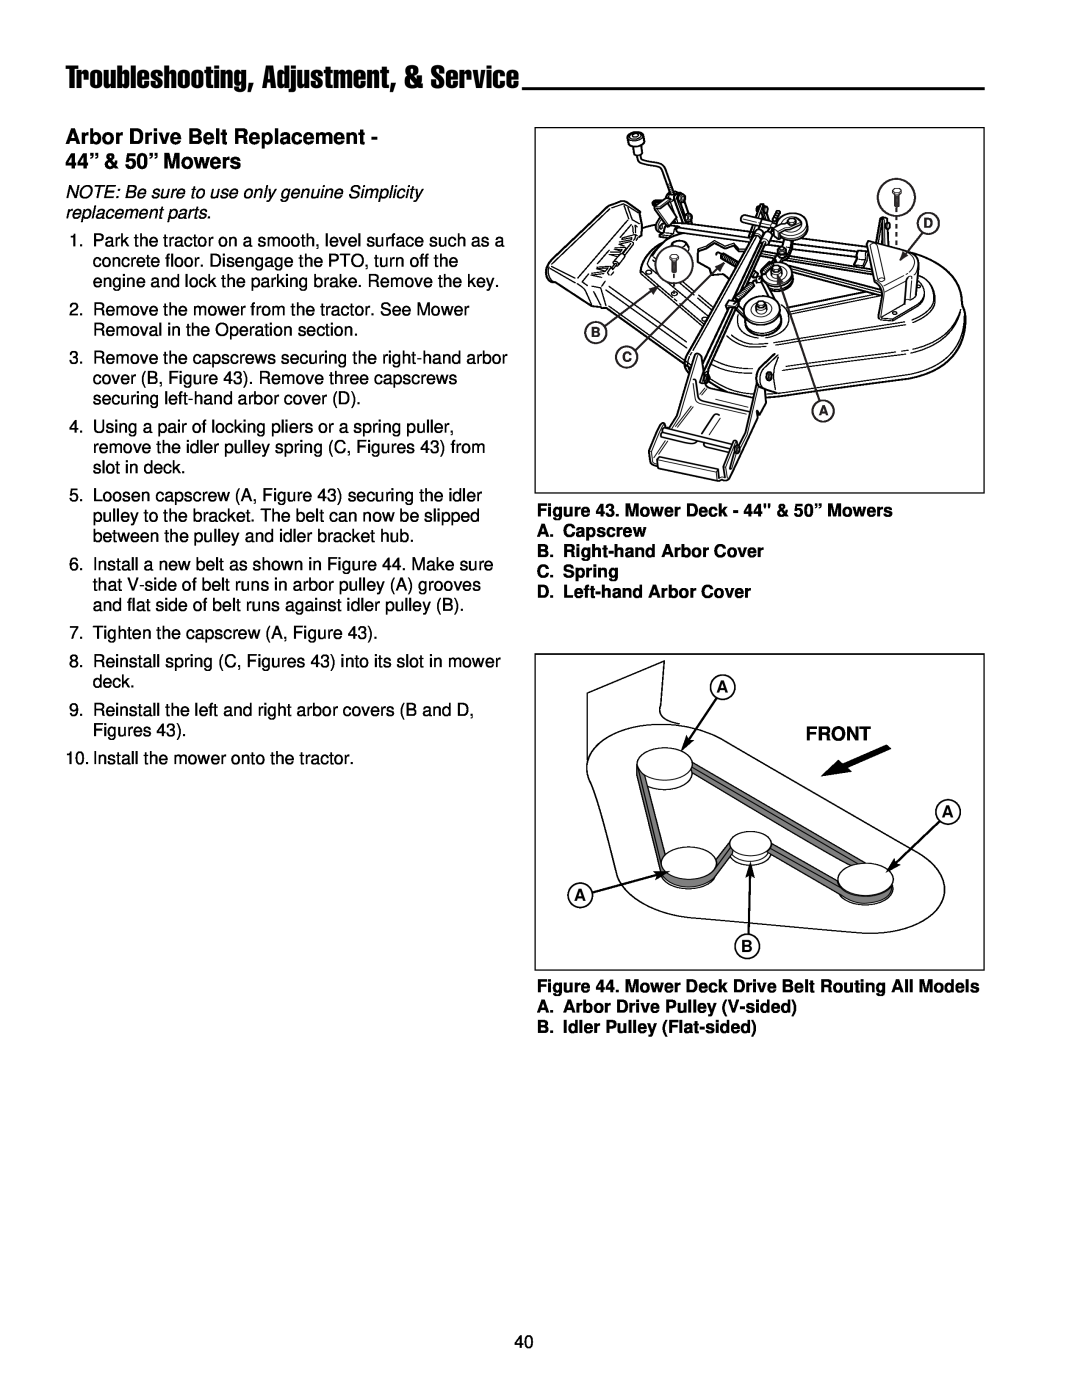 Simplicity 300 Series manual Troubleshooting, Adjustment, & Service, Arbor Drive Belt Replacement - 44” & 50” Mowers, Front 